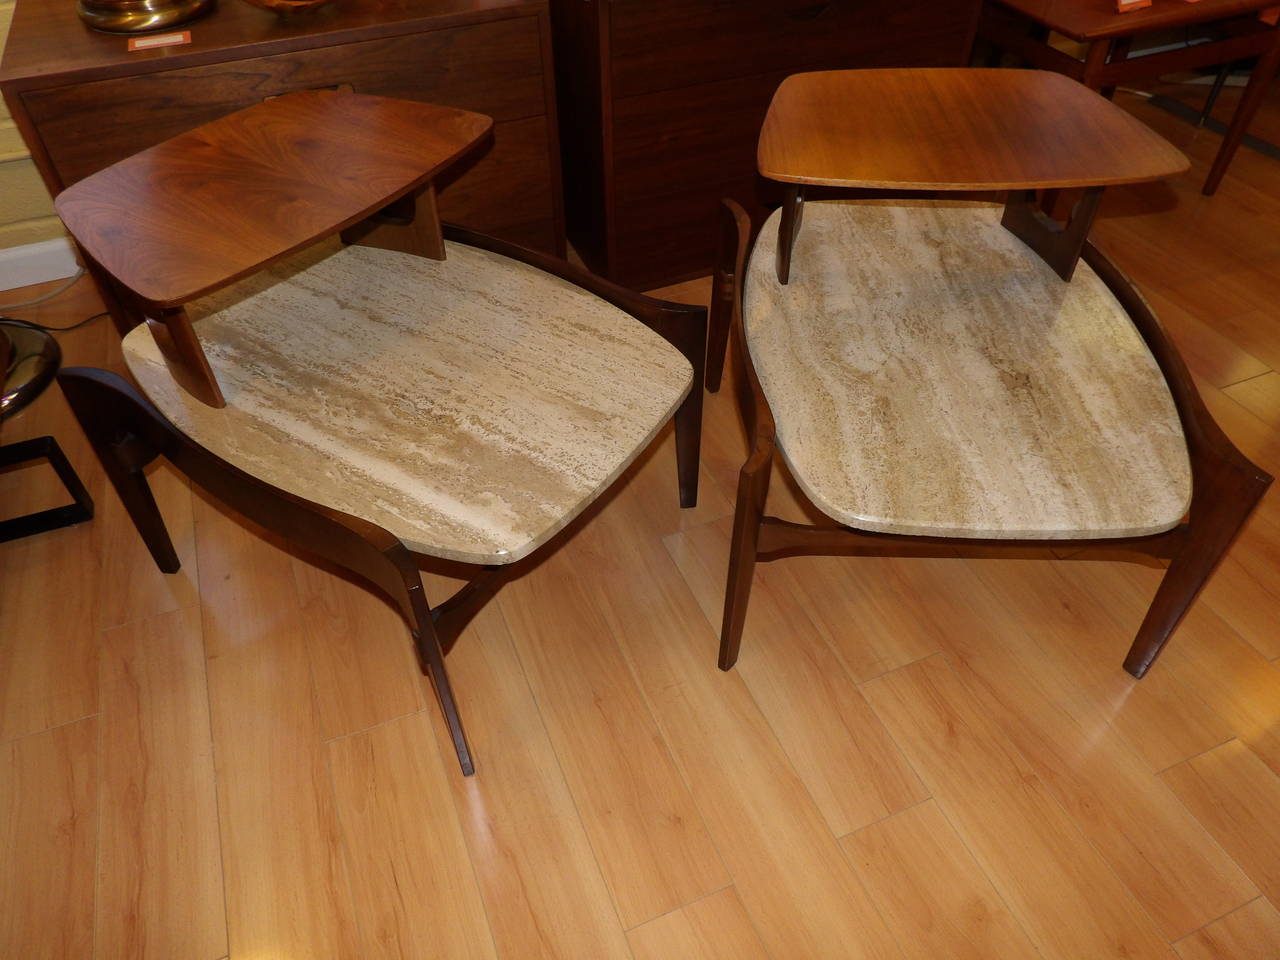 A striking pair of step-end tables designed by Bertha Schaefer for Singer & Sons. Beautiful sculptural walnut frames with oblong oval shaped travertine tops. Measurement to travertine top 14